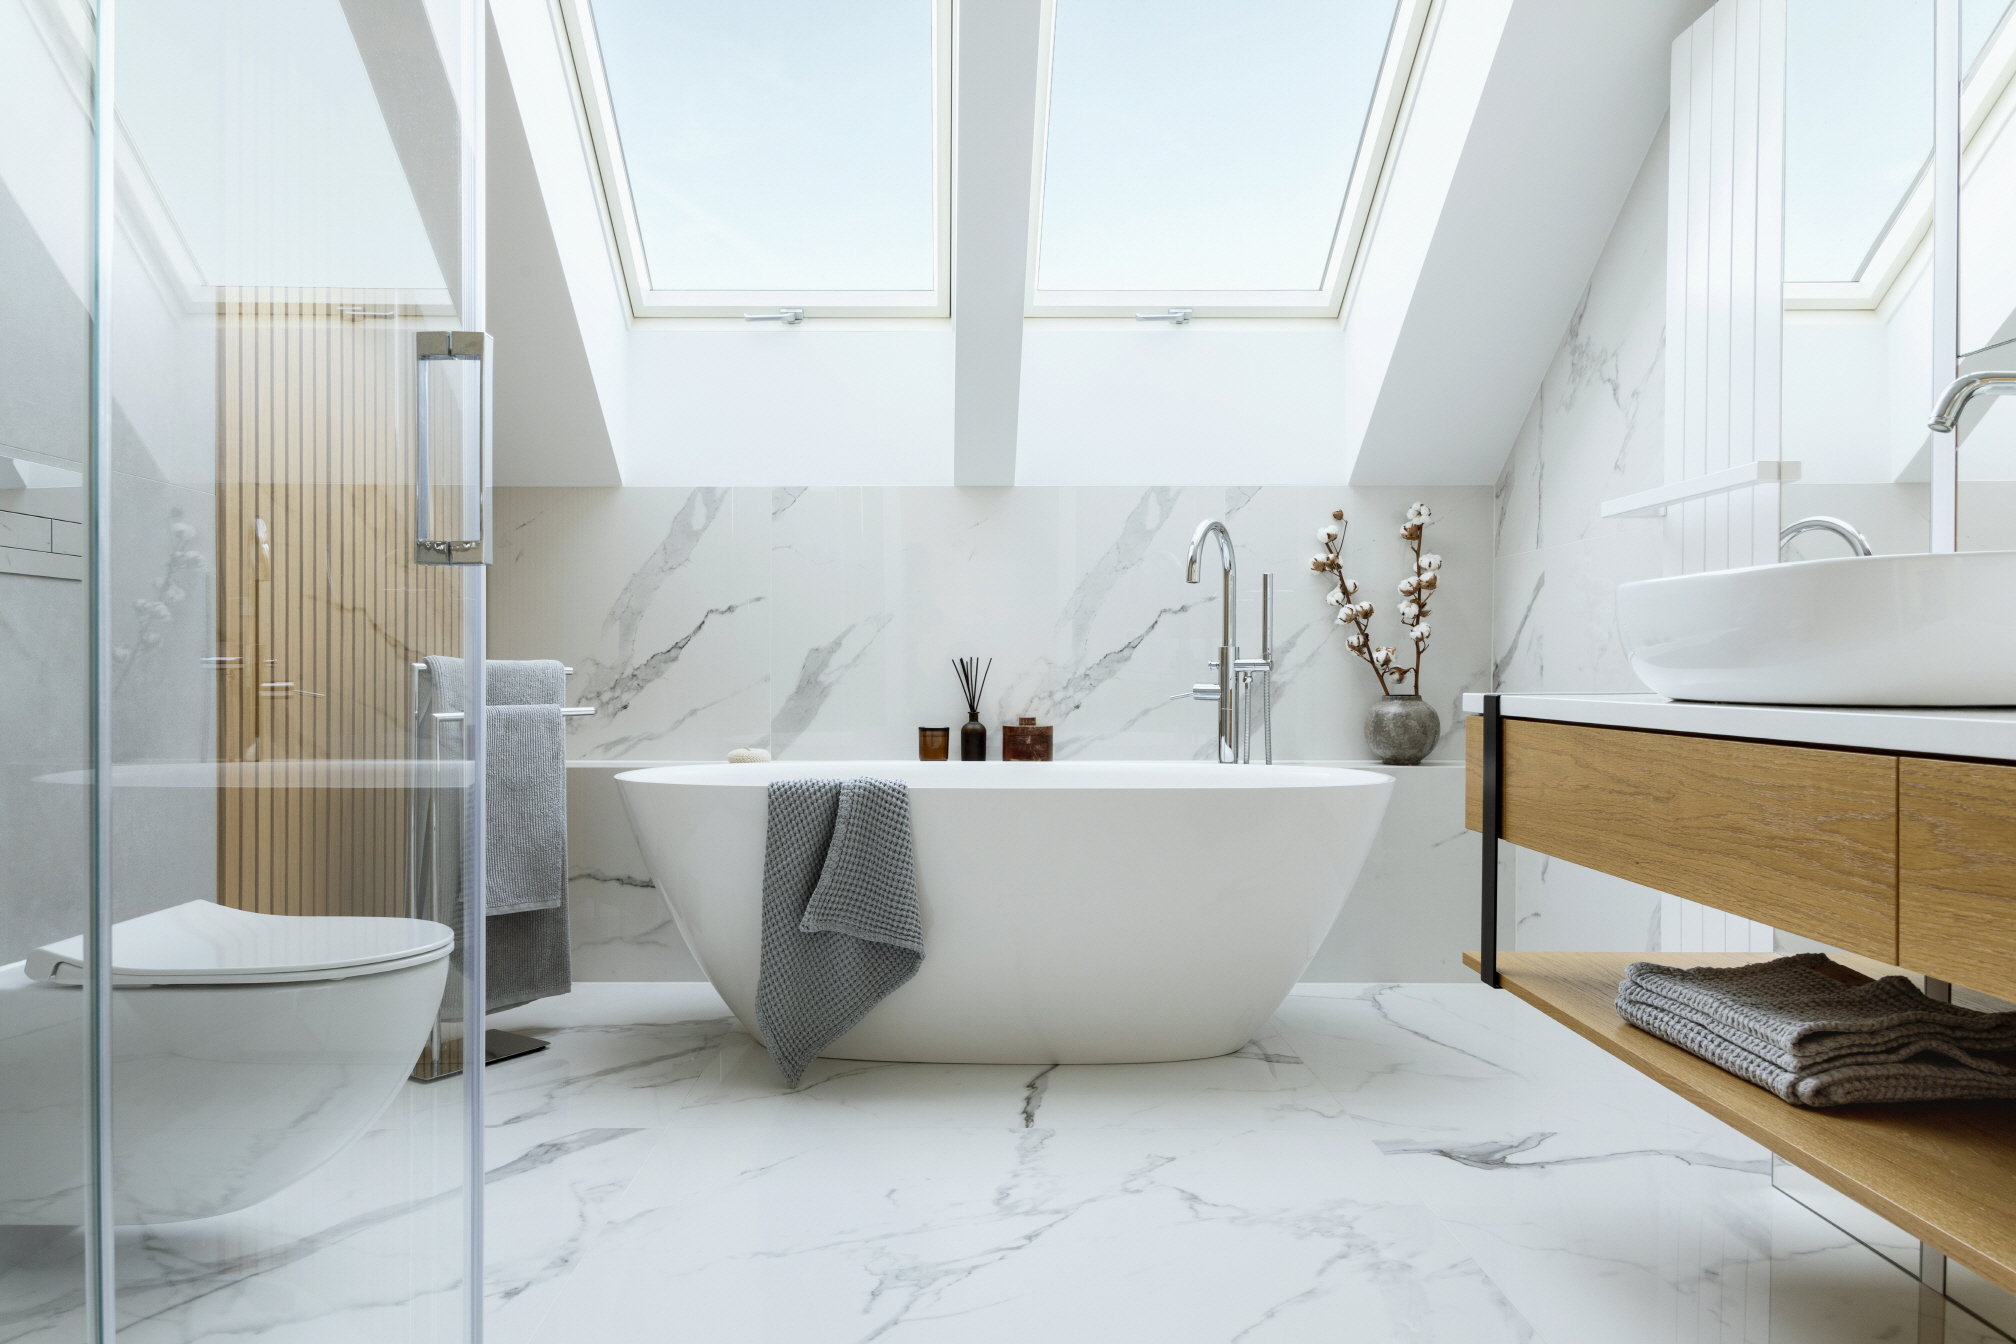 Porcelain tiles have a low water absorption, a smooth finish, a single color, longer lasting, and are suitable for vintage or minimal bathrooms.